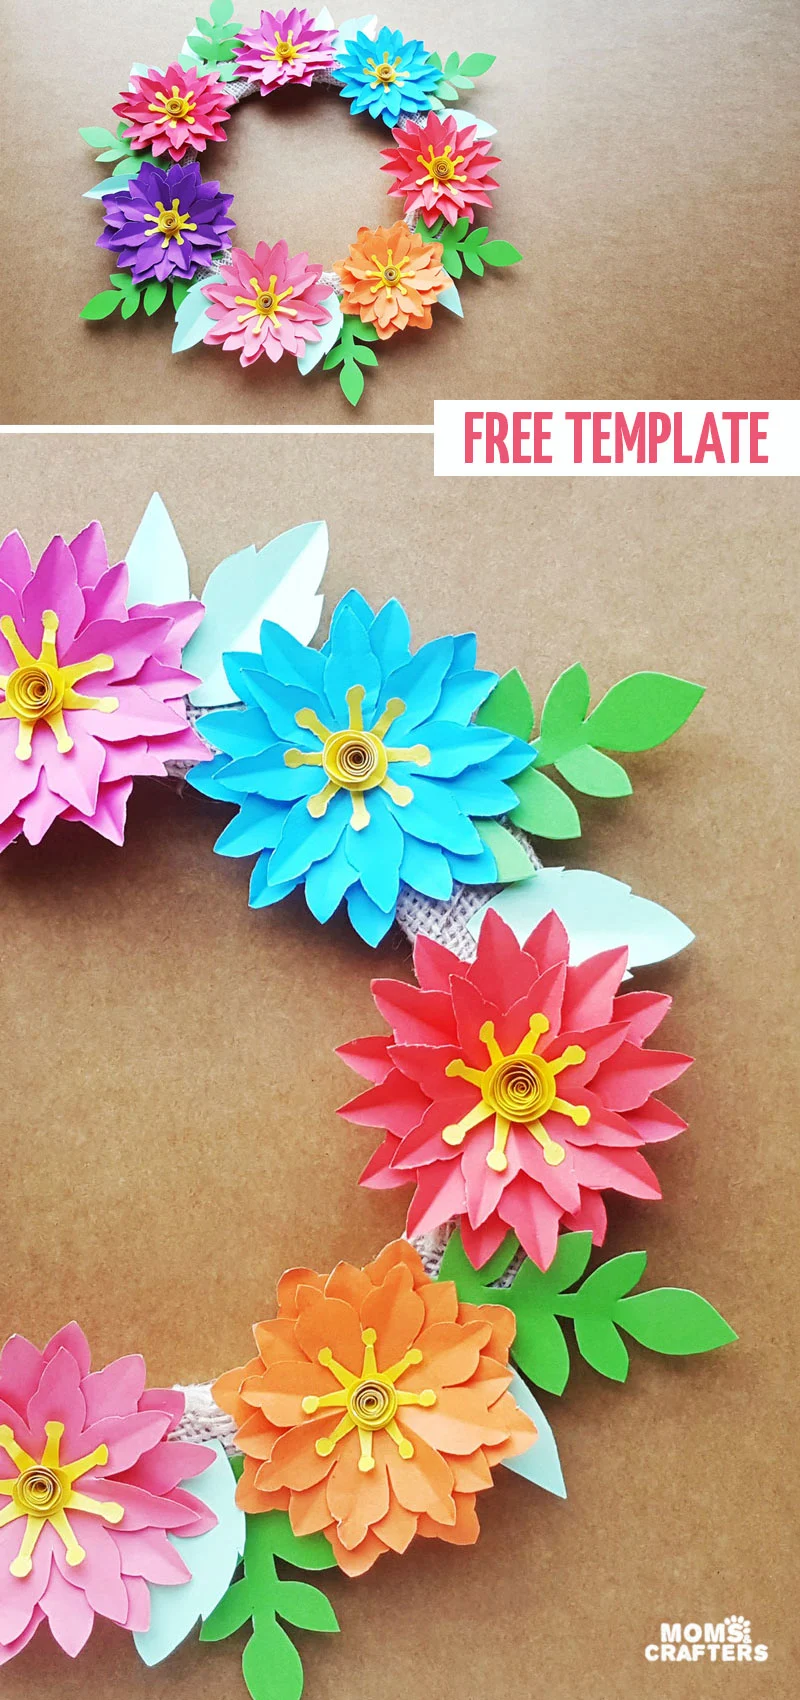 Click for a beautiful paper flower wreath tutorial and free printable templates for this fun Spring home decor project for teens